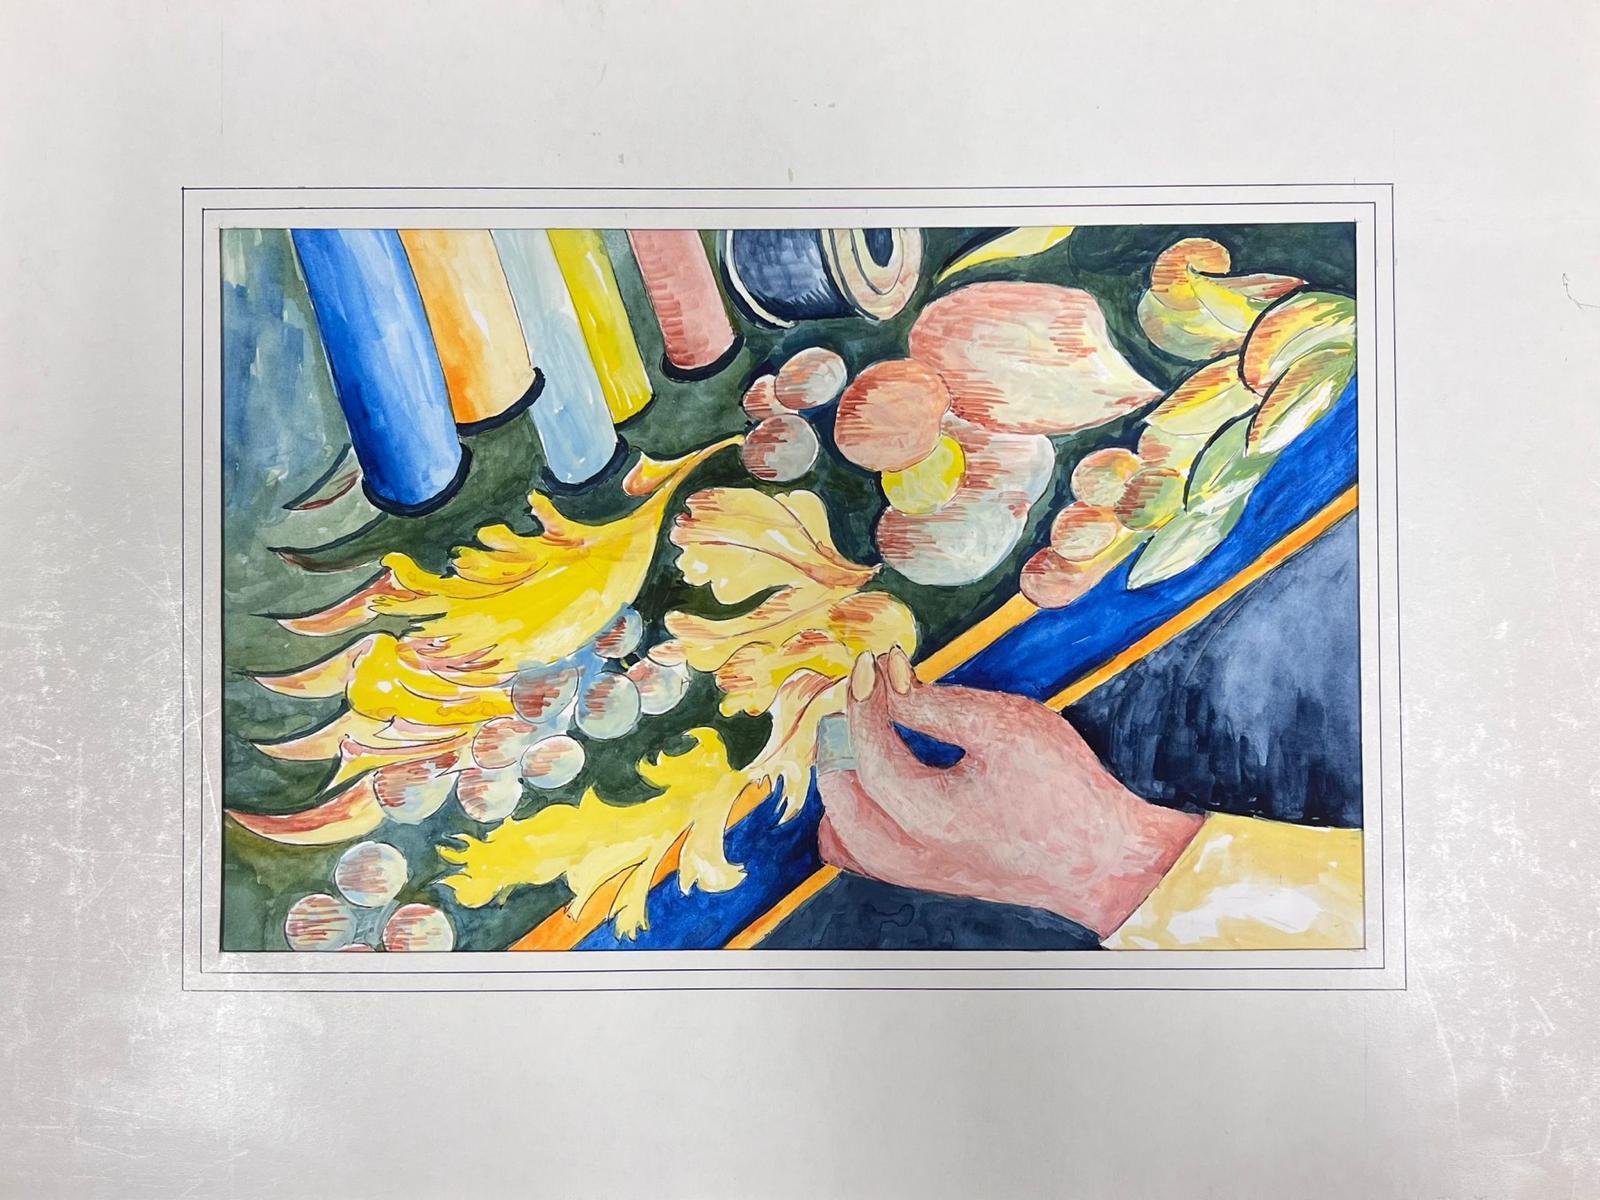 Threading The Needle
by Bernard Labbe (French mid 20th century)
original watercolour on artist paper mounted in card frame
size: 12 x 16 inches
condition: very good and ready to be enjoyed

provenance: the artists atelier/ studio, France (stamped